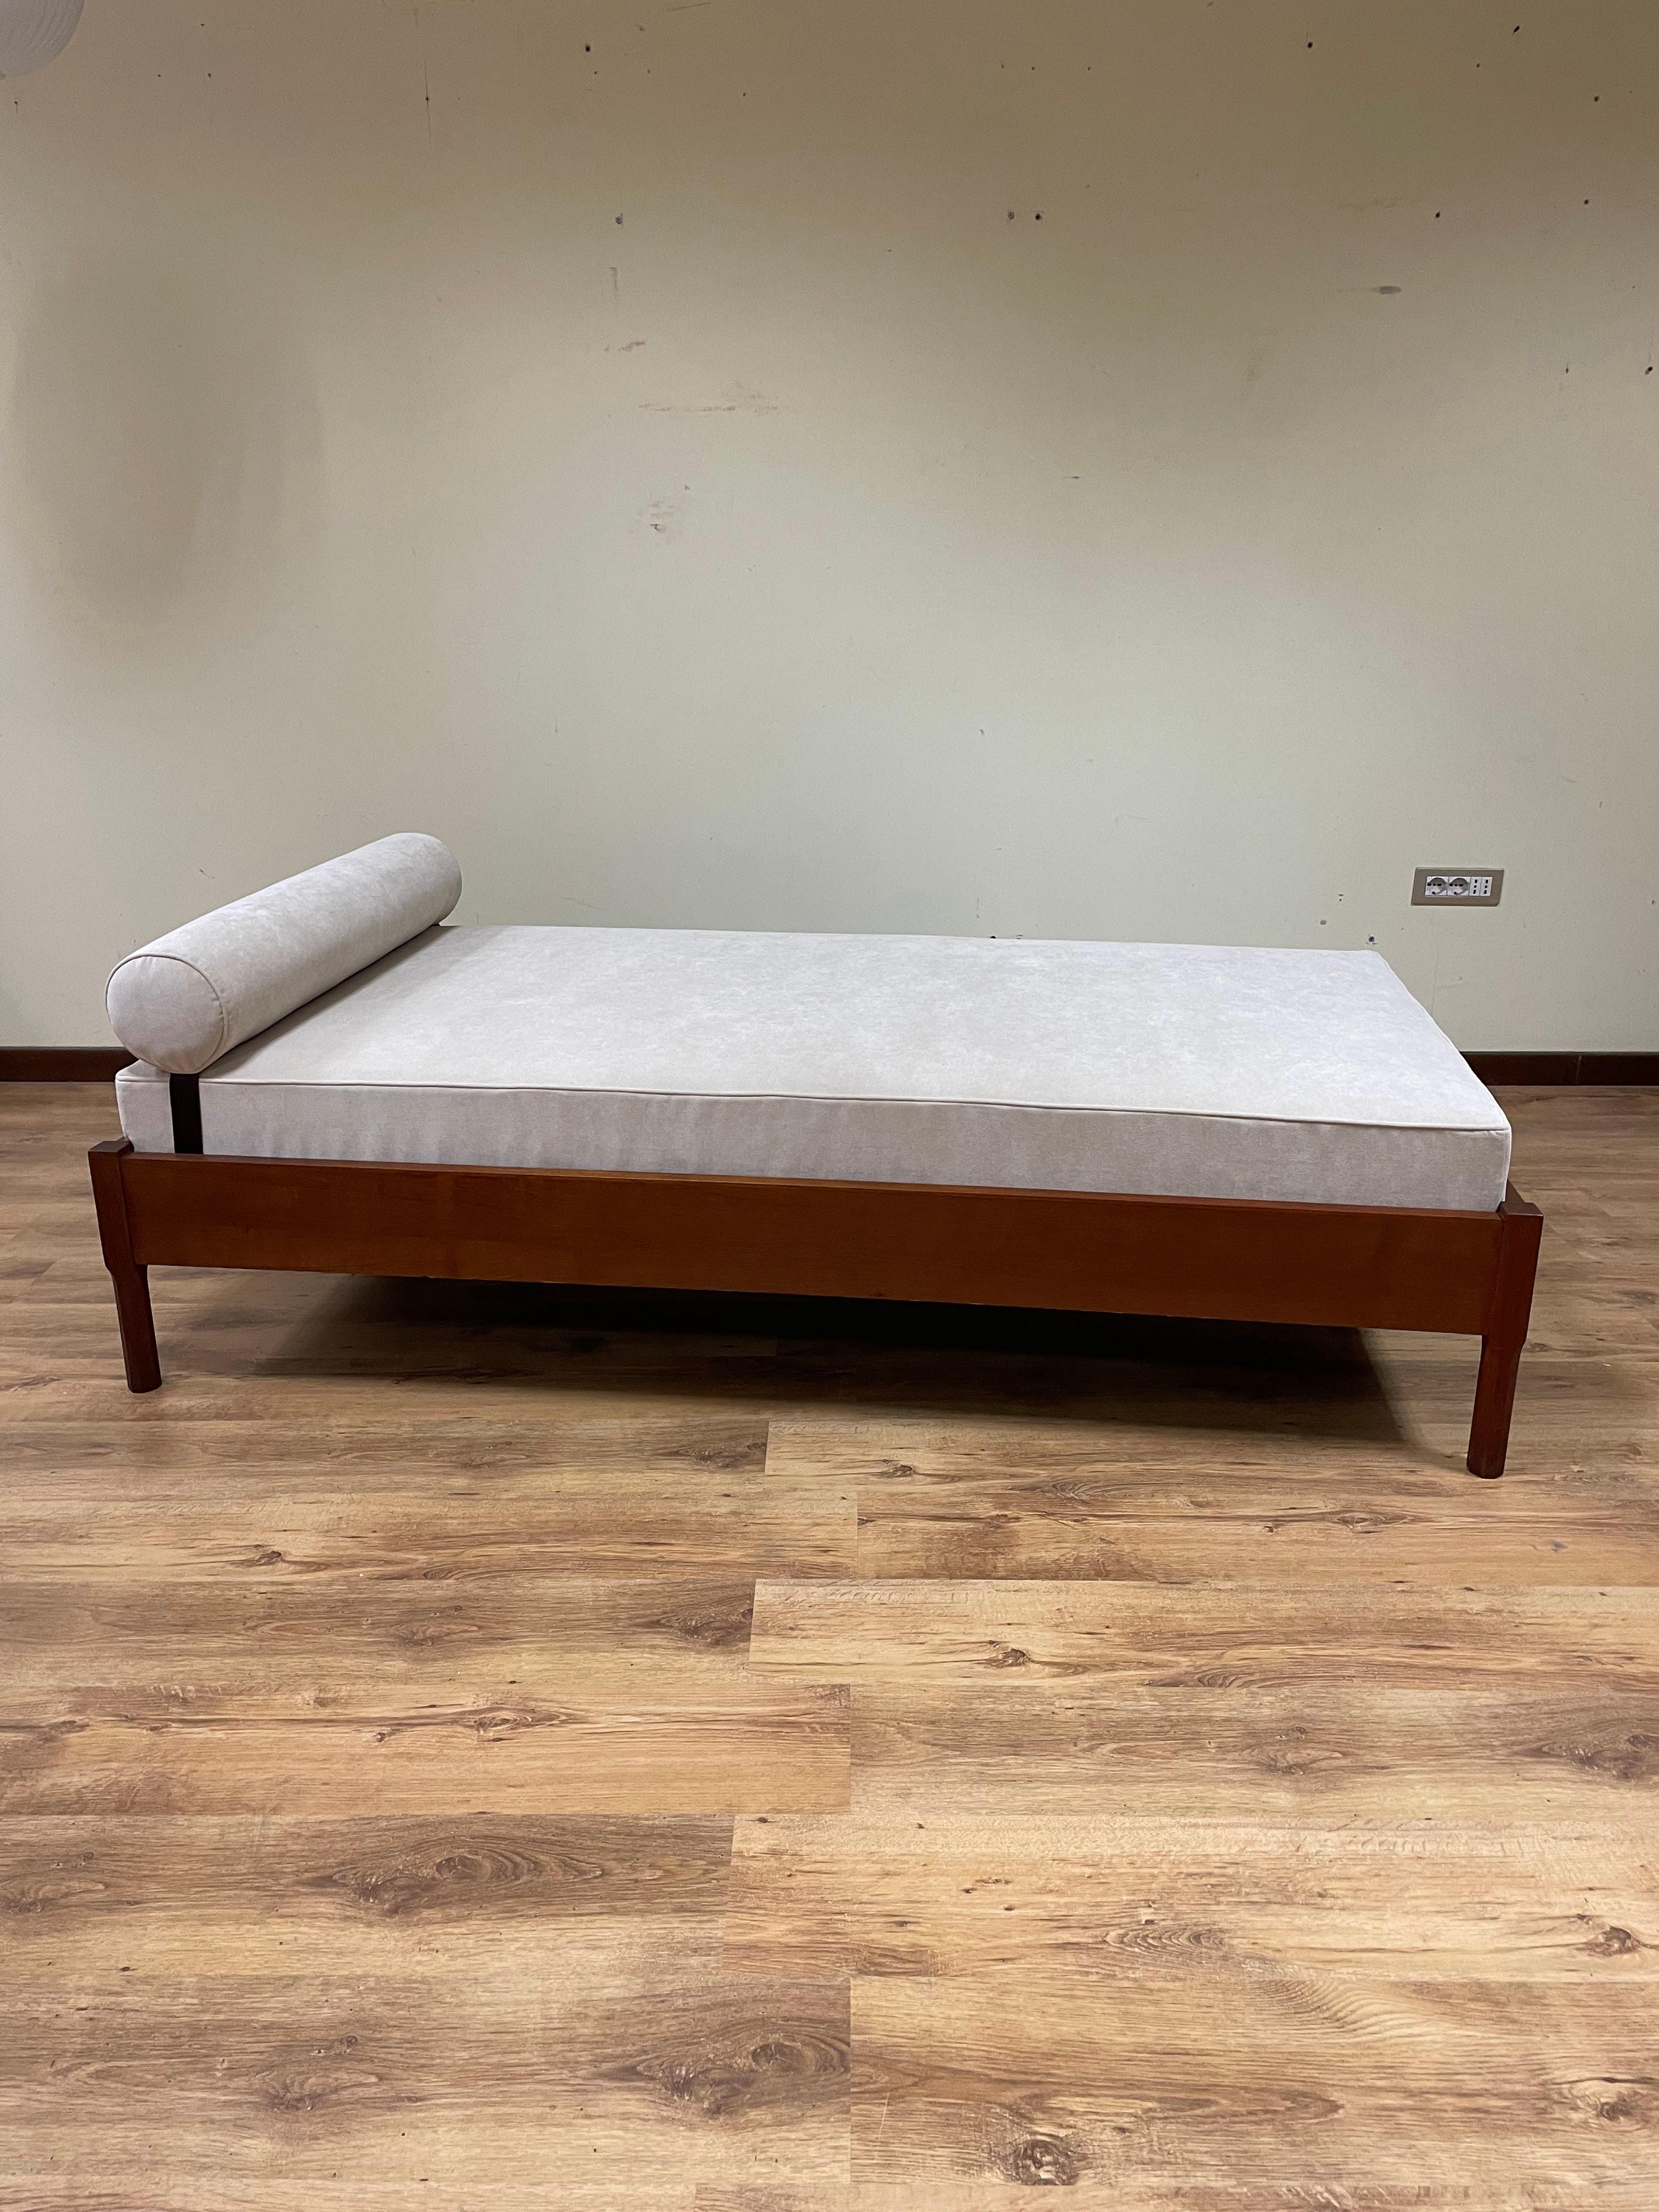 1960s daybed made of teak wood and of Italian manufacture.

The daybed has been completely restored recently.

It is complete with bolster that can be positioned as desired.

New natural-colored, stain-resistant fabric upholstery.